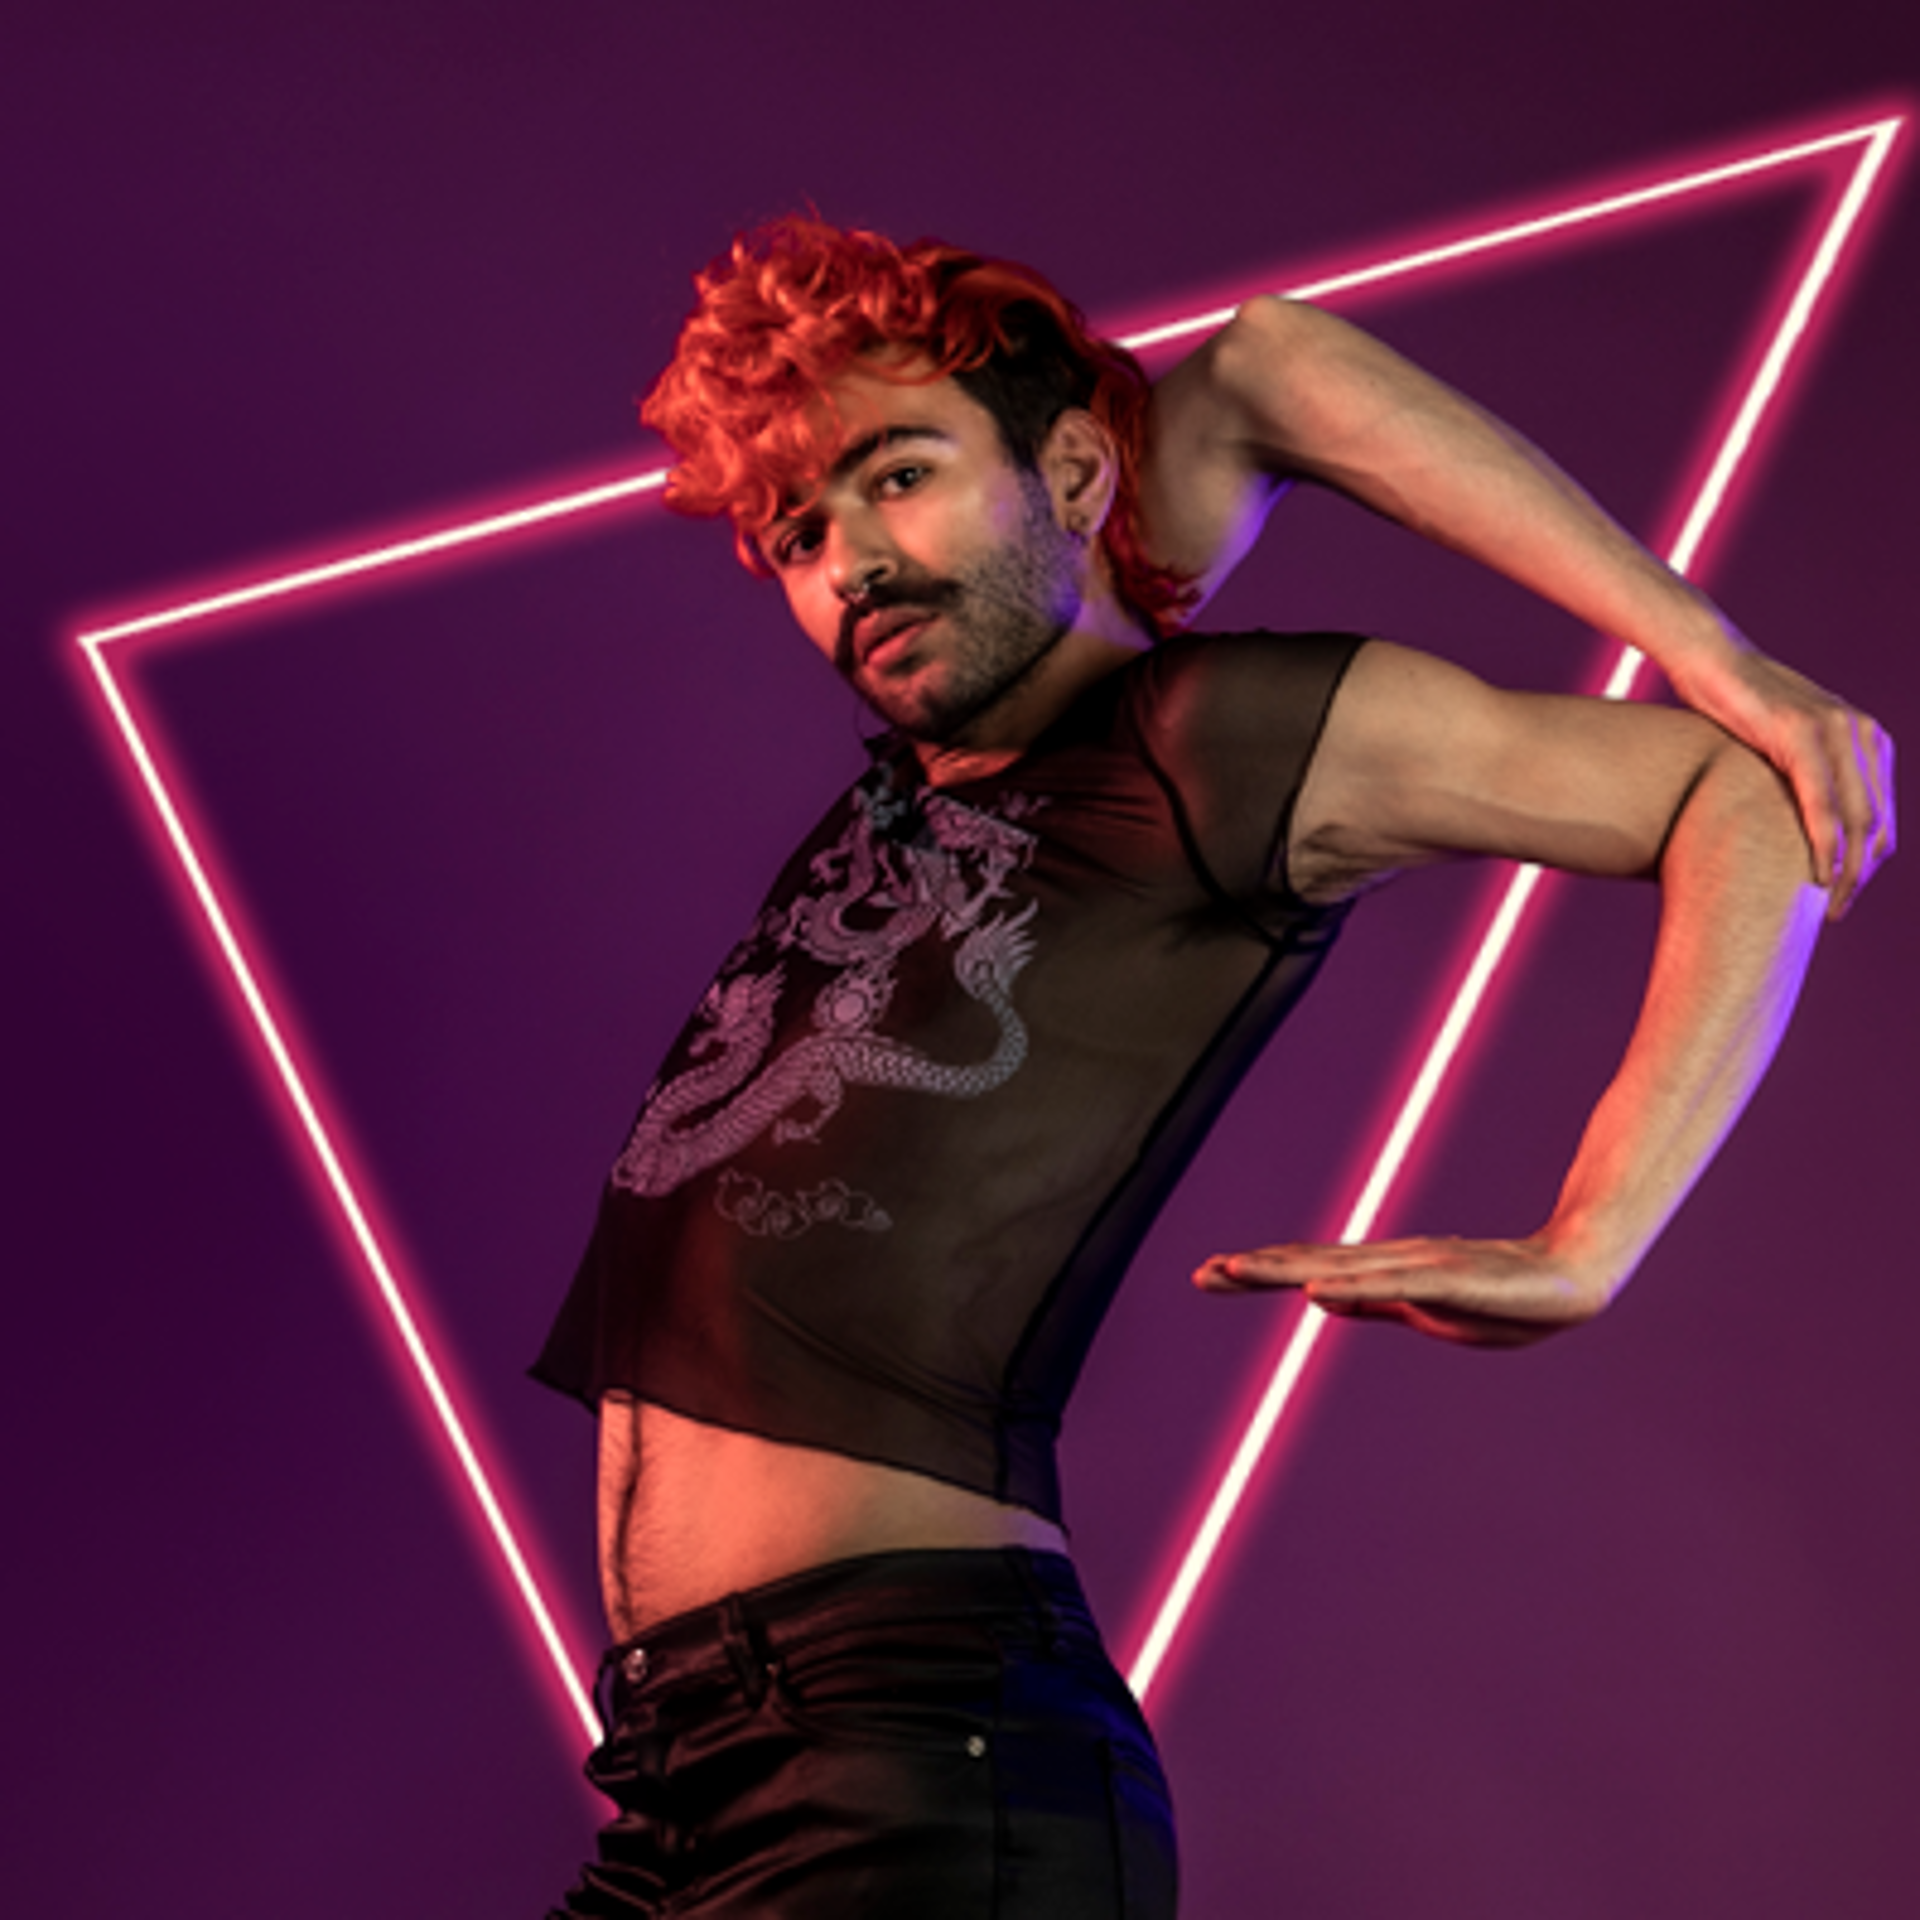 LGBTQ+ voguing dancer with curly red mohawk and black beard, holding onto his elbow. Wearing see-through black top on purple photo backdrop.